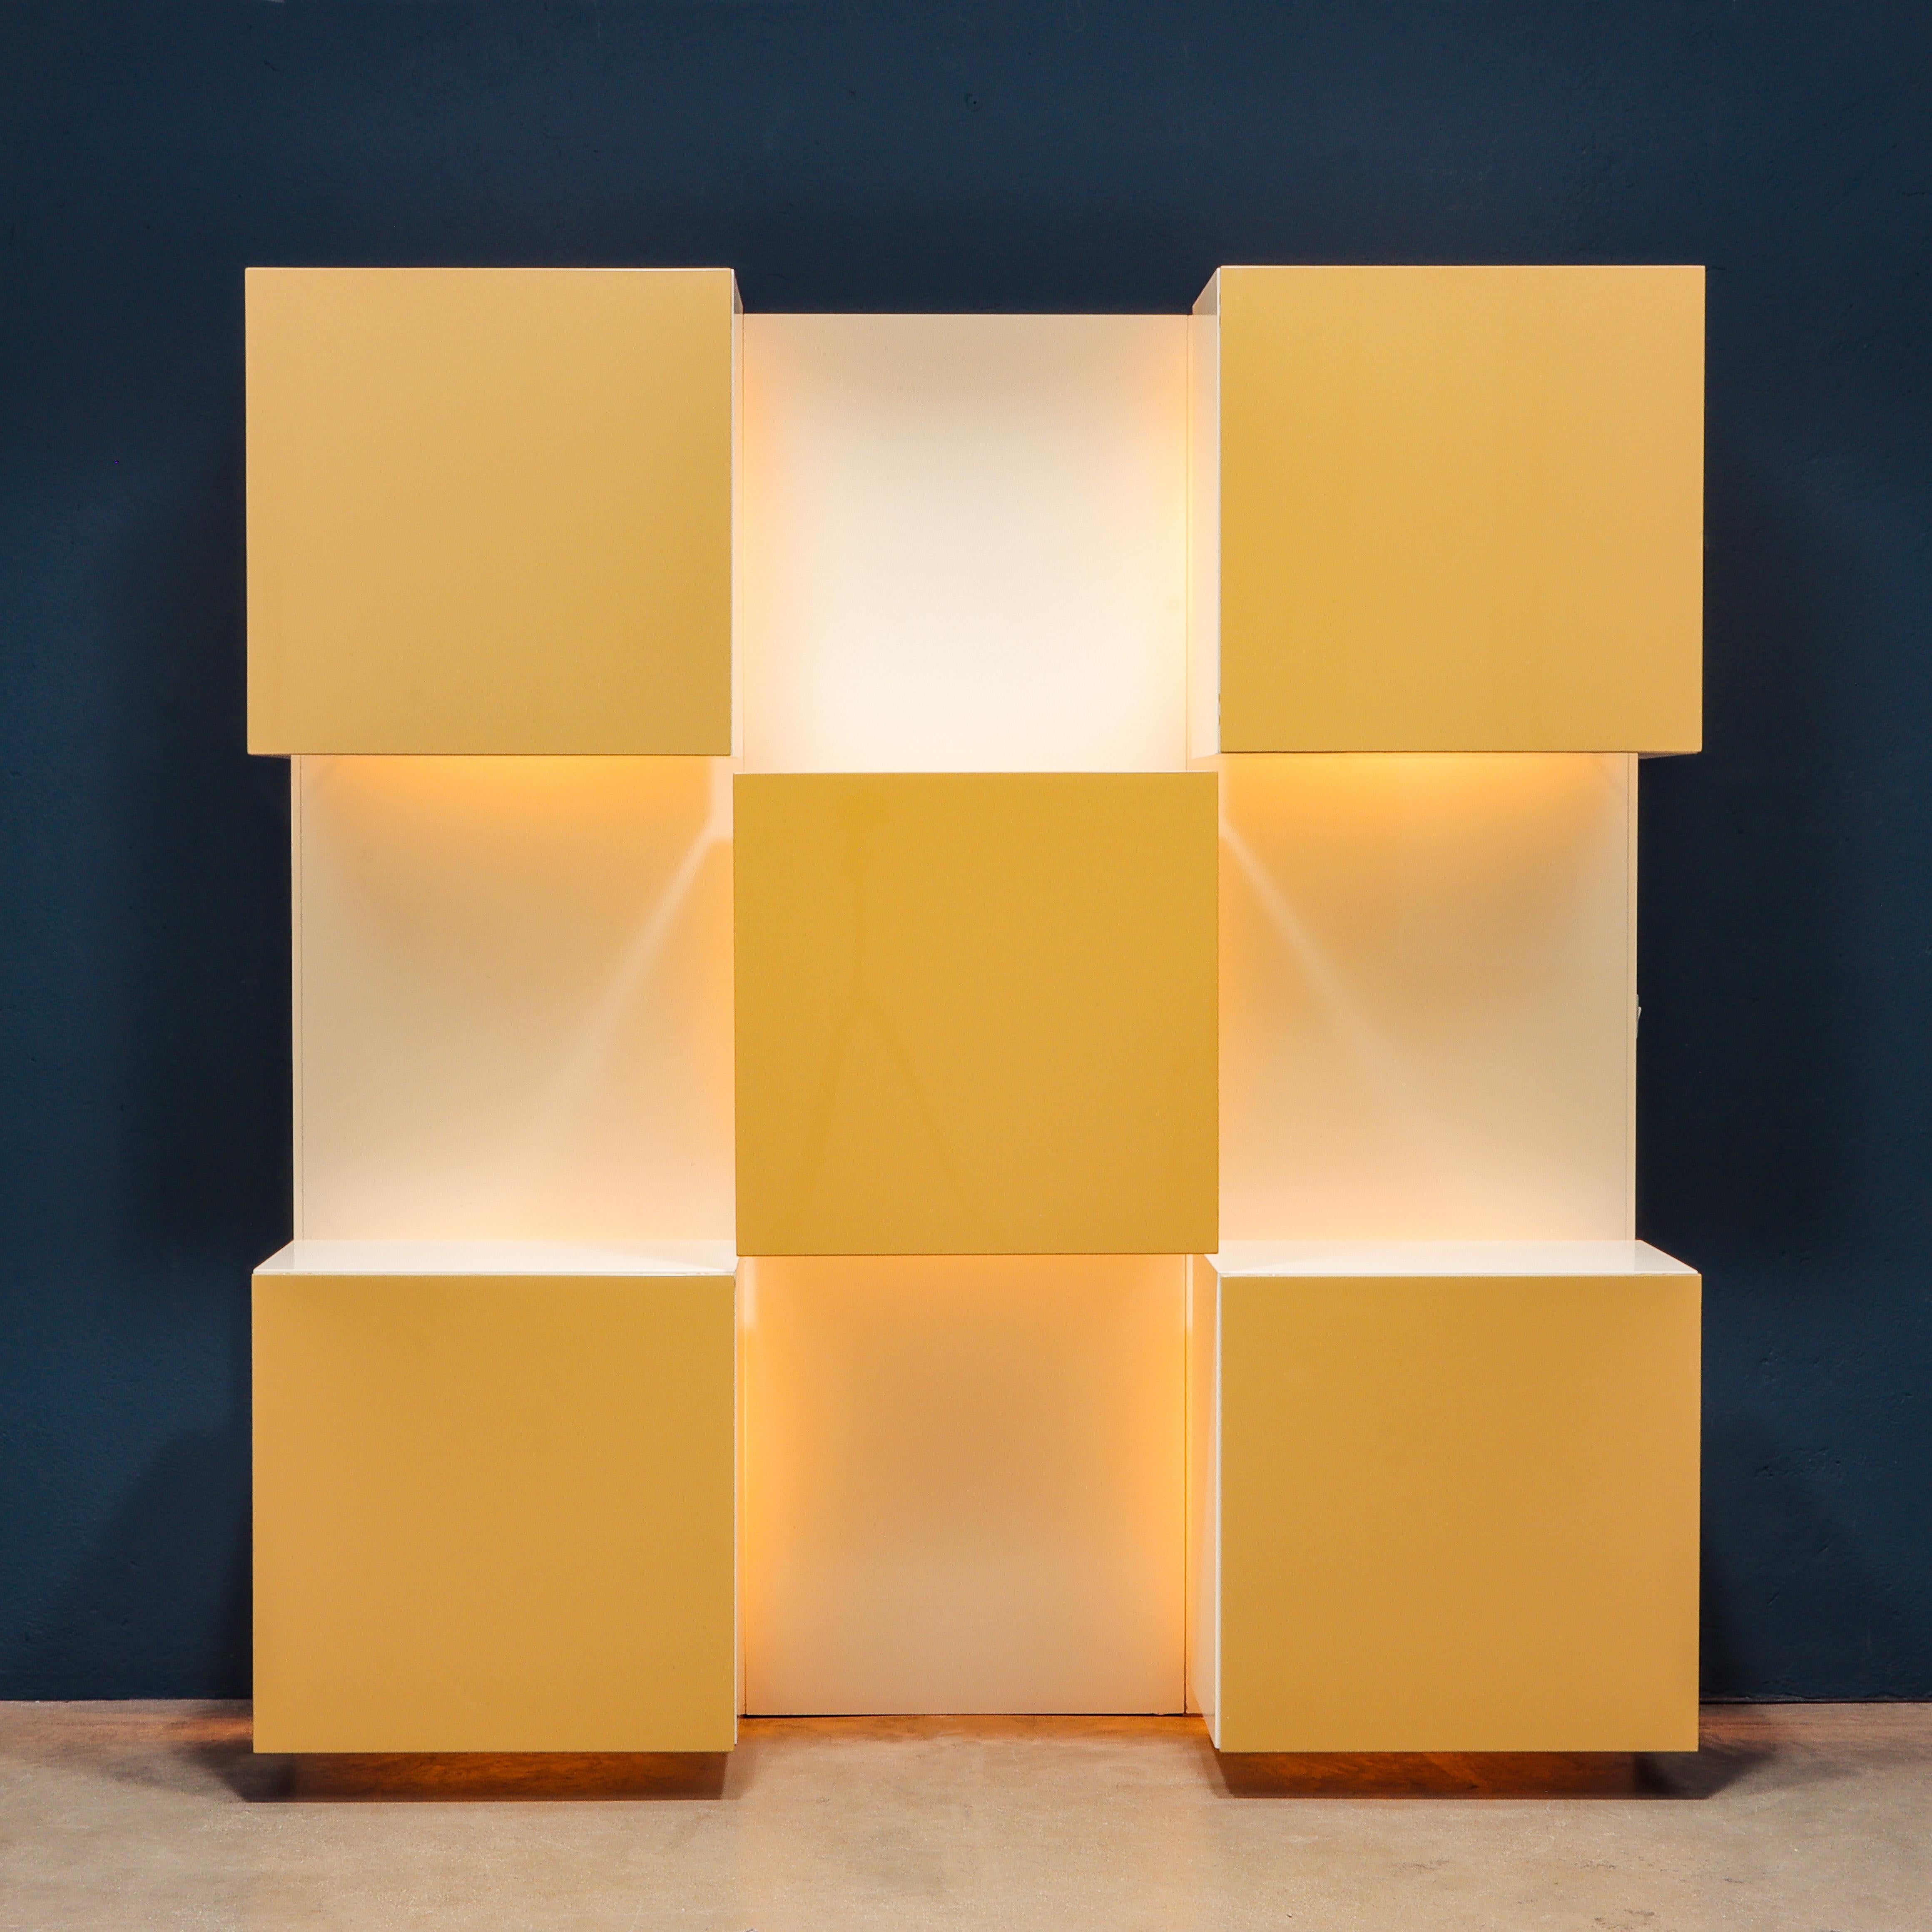 'Life' modular wall system designed by Roberto Monsani and produced by Acerbis in the 1980s.